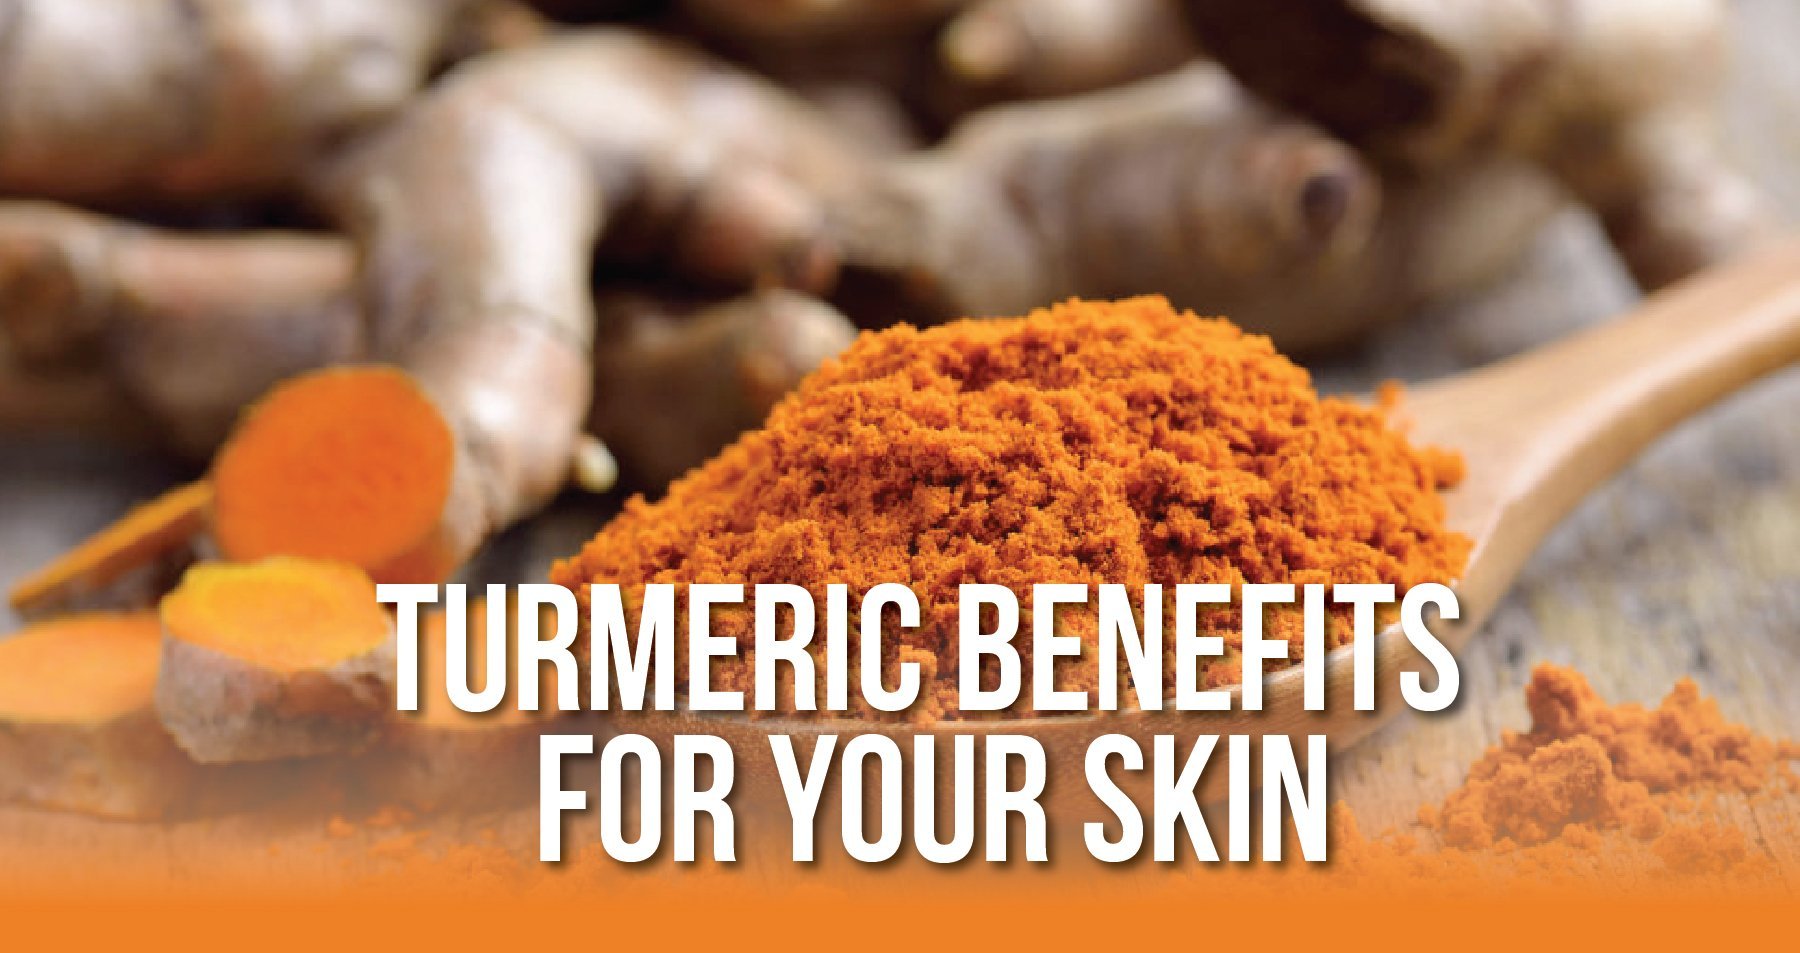 Turmeric Skin Benefits That Will Surprise You | iHeart Nature